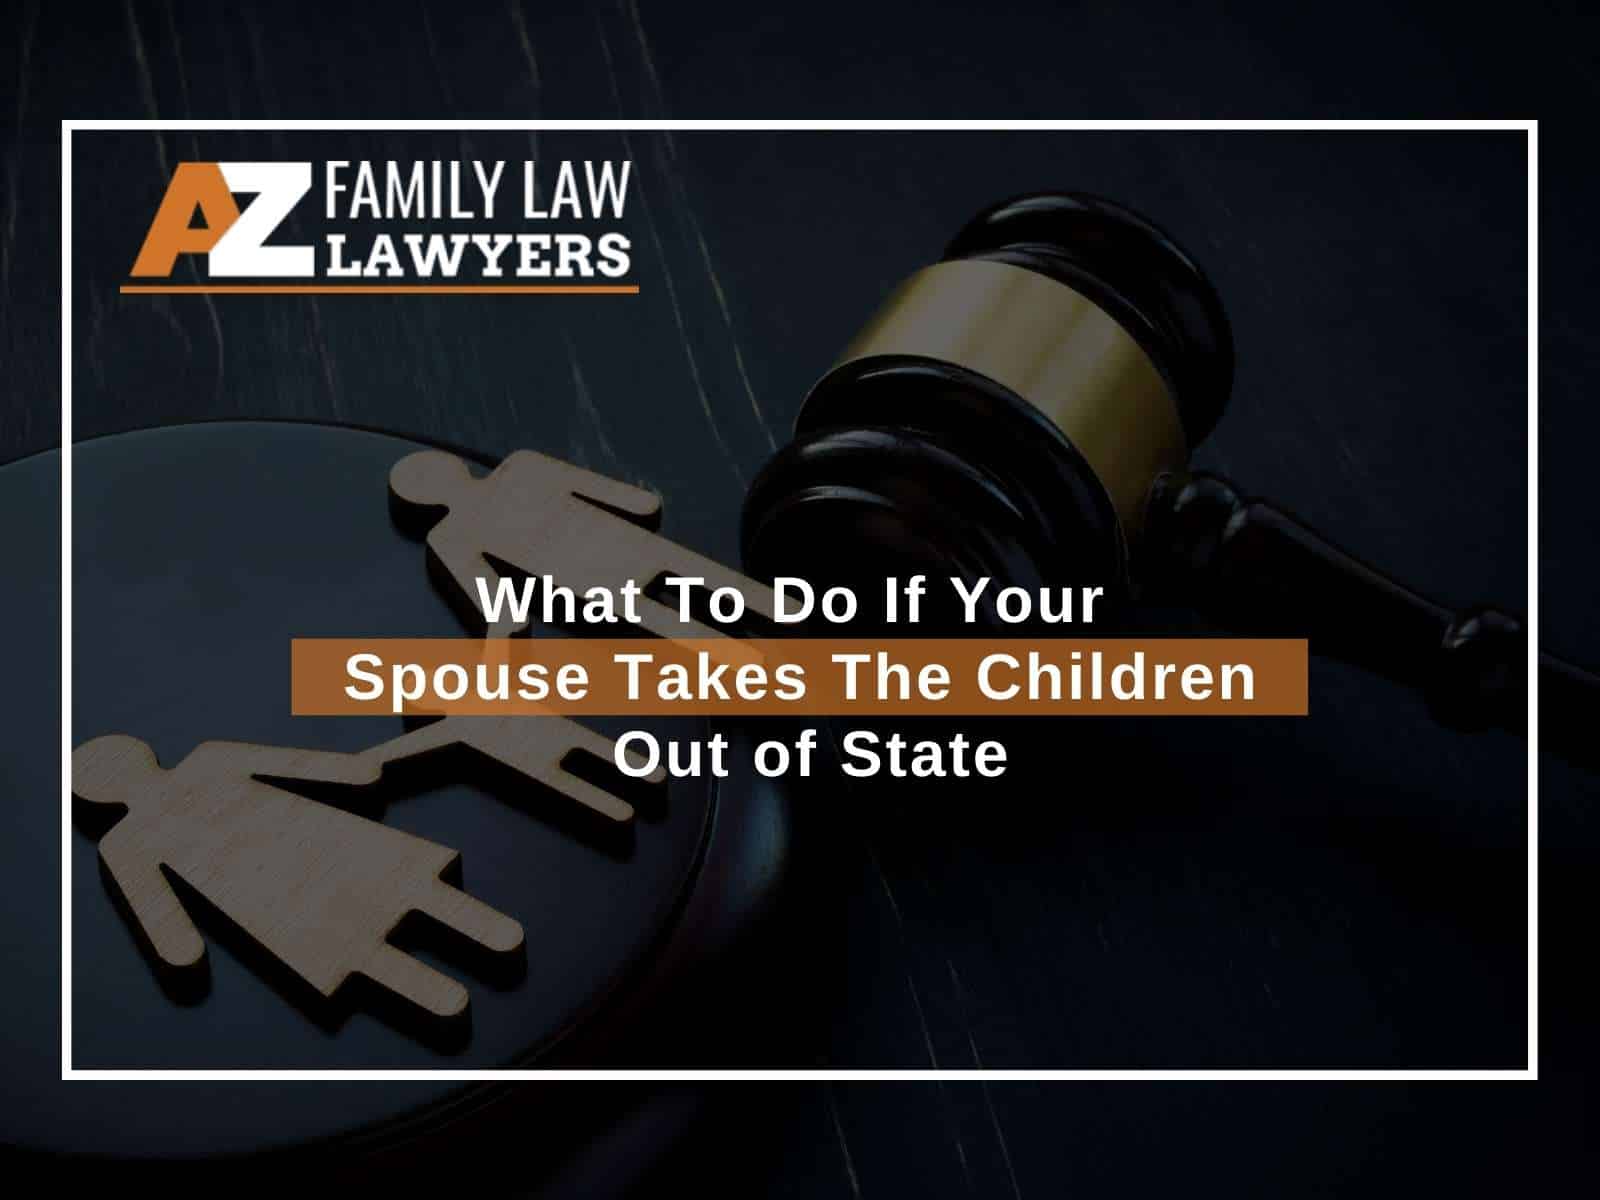 What To Do If Your Spouse Takes The Children Out of State